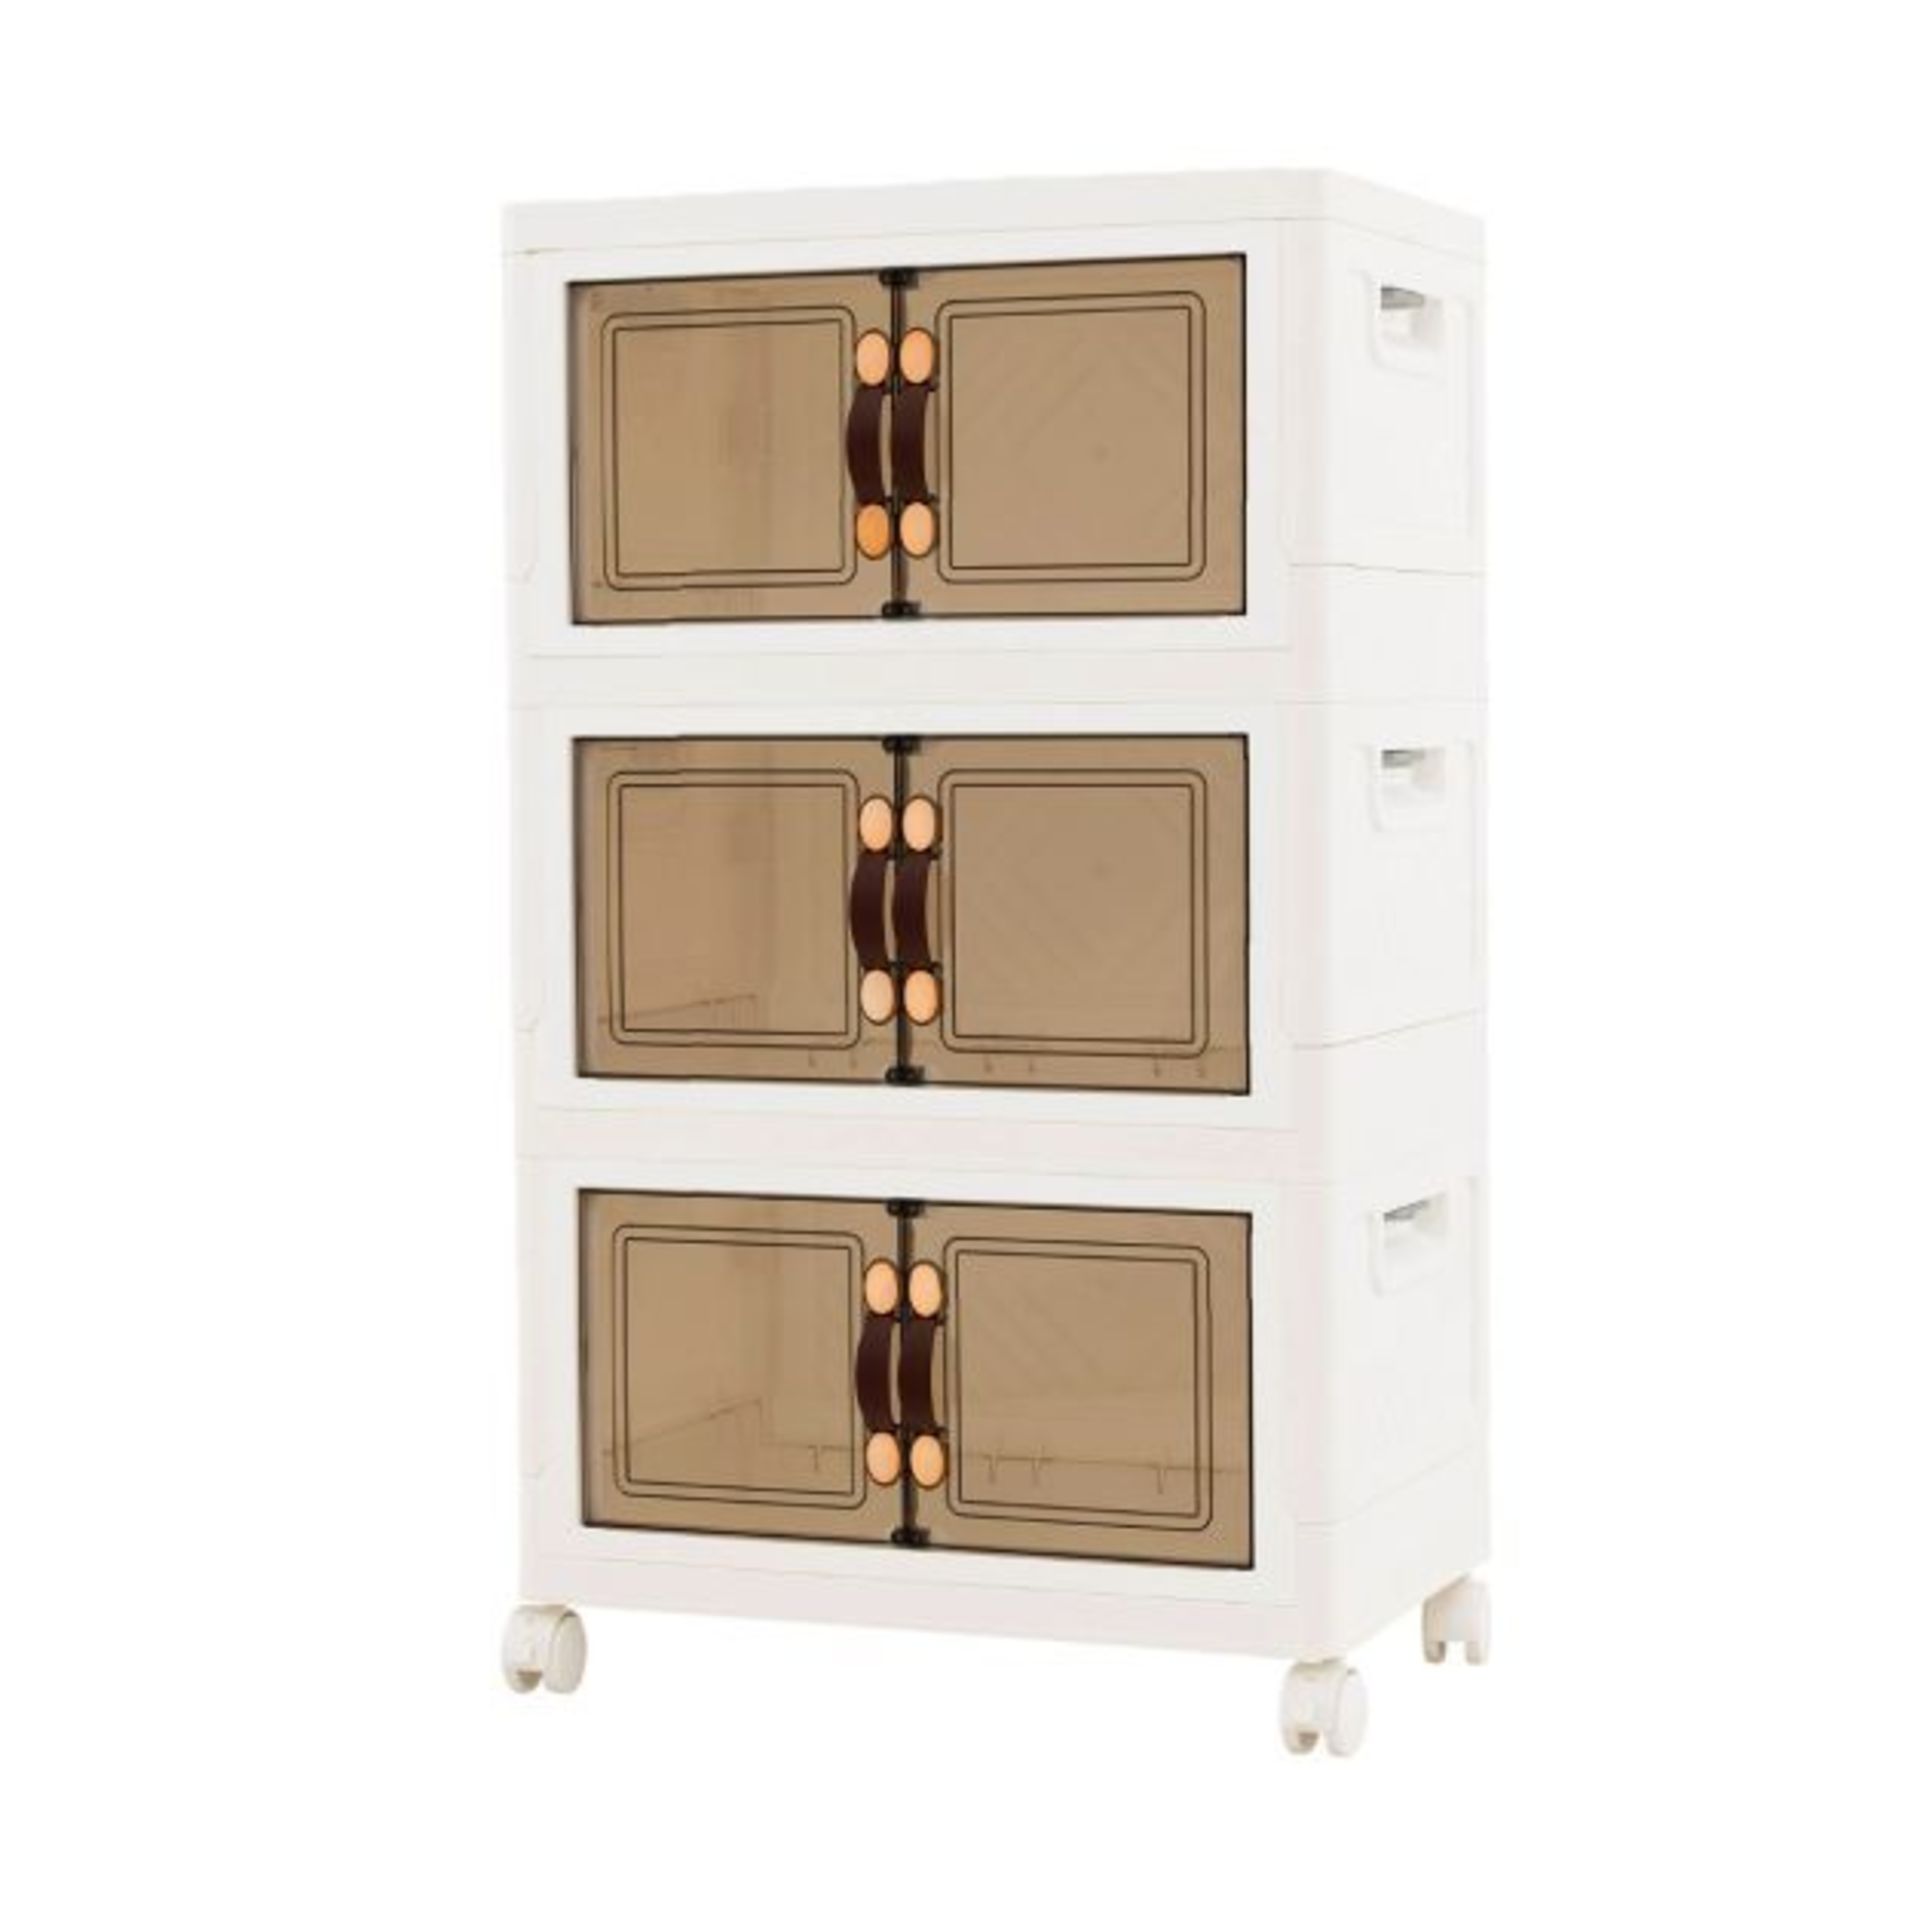 Stackable Storage Bins with Lockable Wheels. - ER53. This large storage bin is the perfect solution